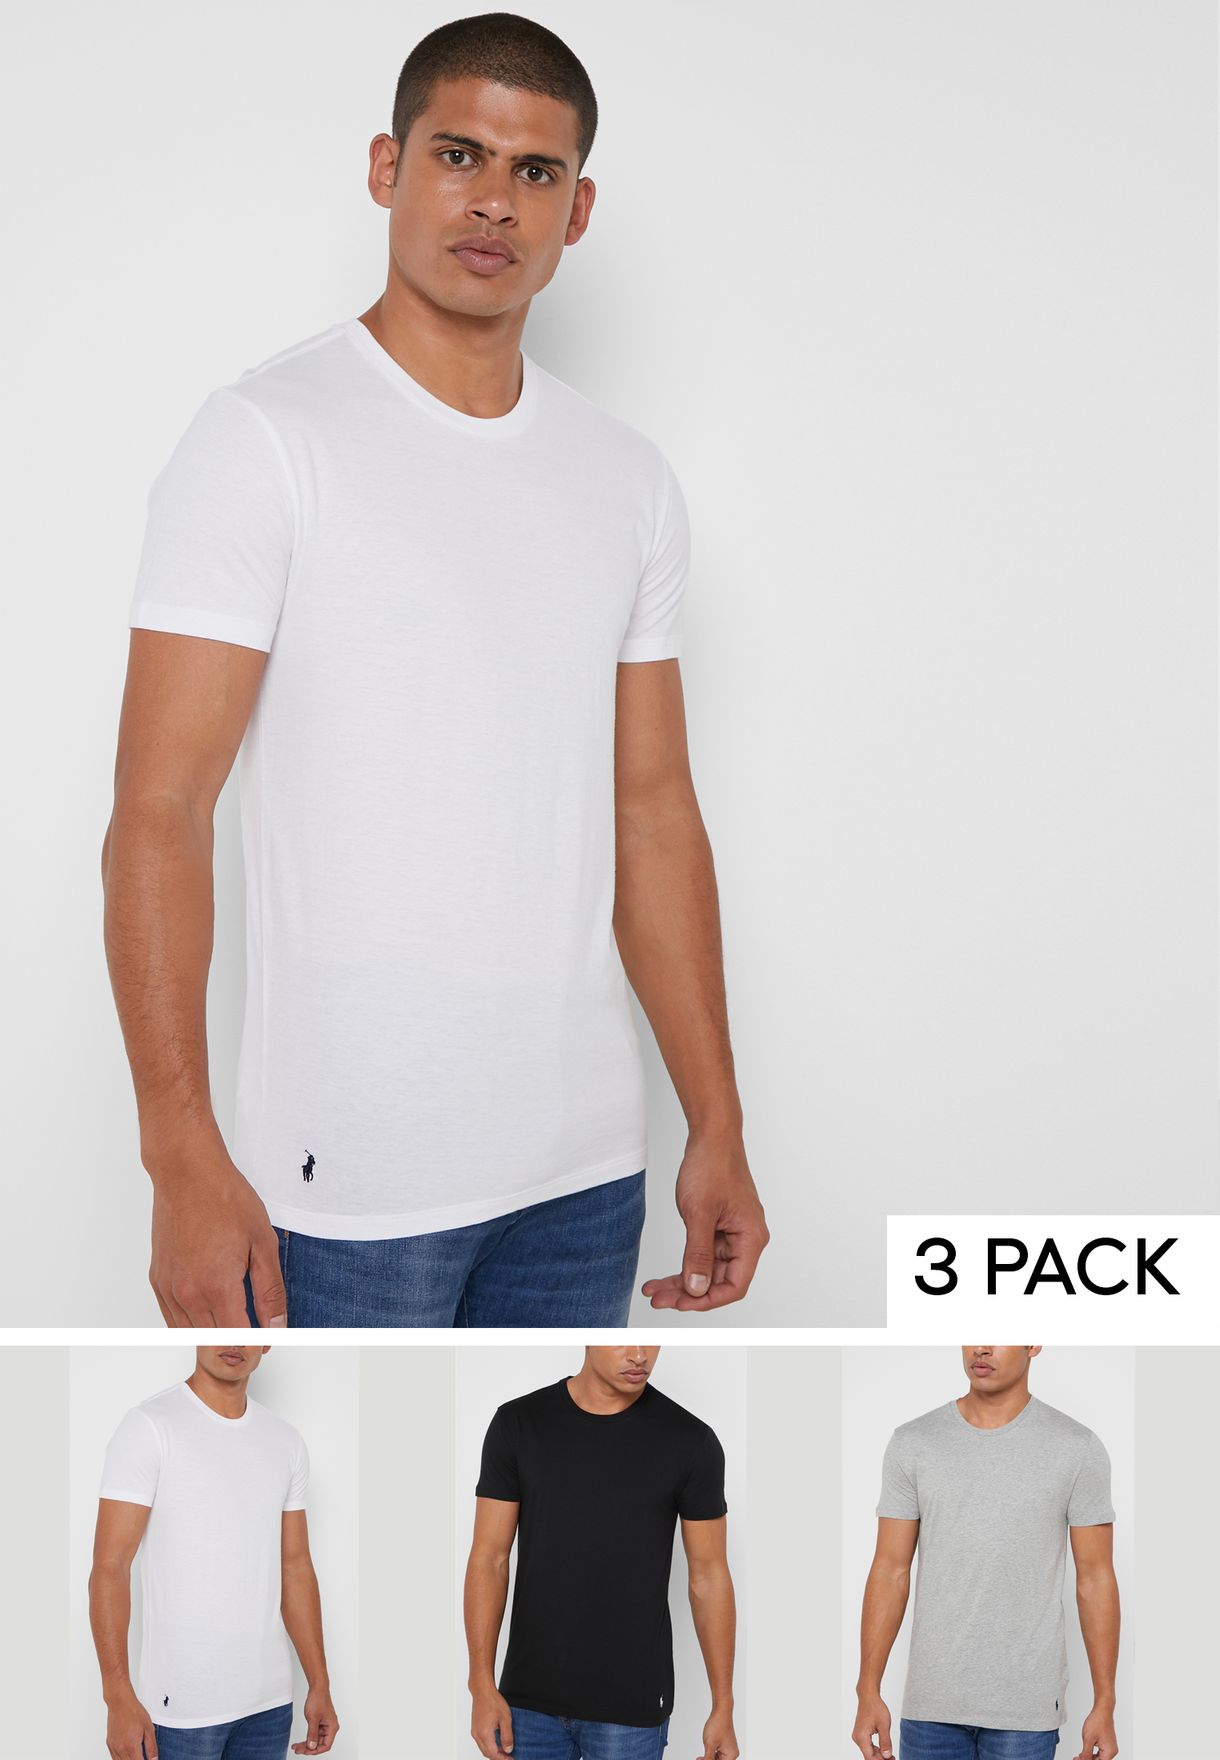 Buy Polo Ralph Lauren multicolor 3 Pack Assorted Crew Neck T-Shirts for Men  in Riyadh, Jeddah